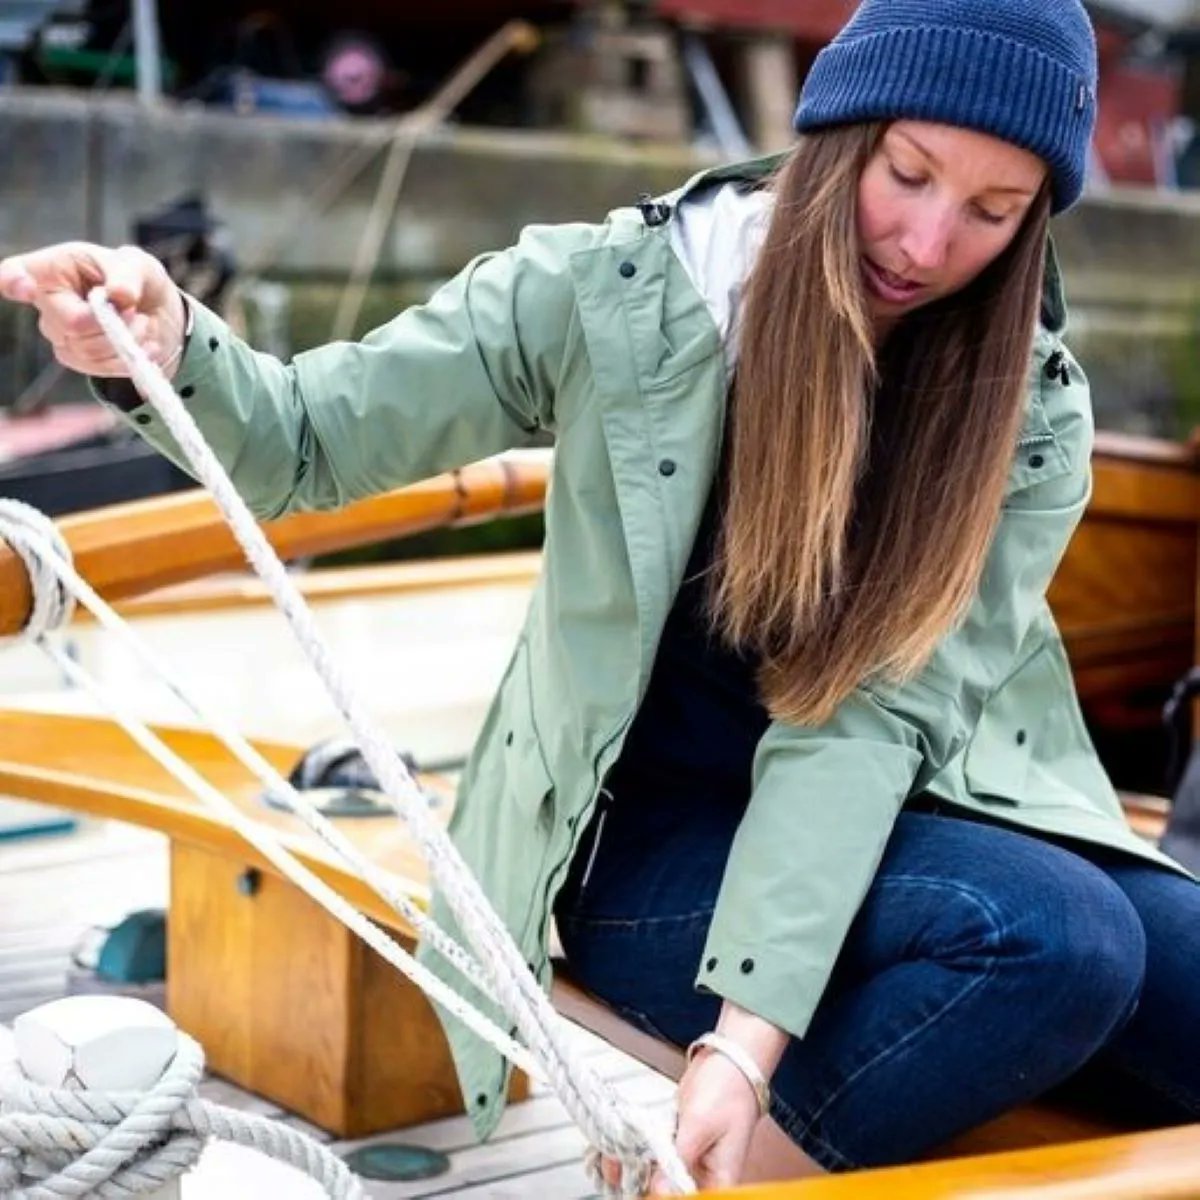 Earlier this week, Women In Boatbuilding CIC launched an exciting initiative 👉 buff.ly/3kWlXUp aiming to support women in their early careers in boatbuilding and related trades. Thanks to @CornwallMarineA for sharing through their fantastic newsletter! #NCW2023